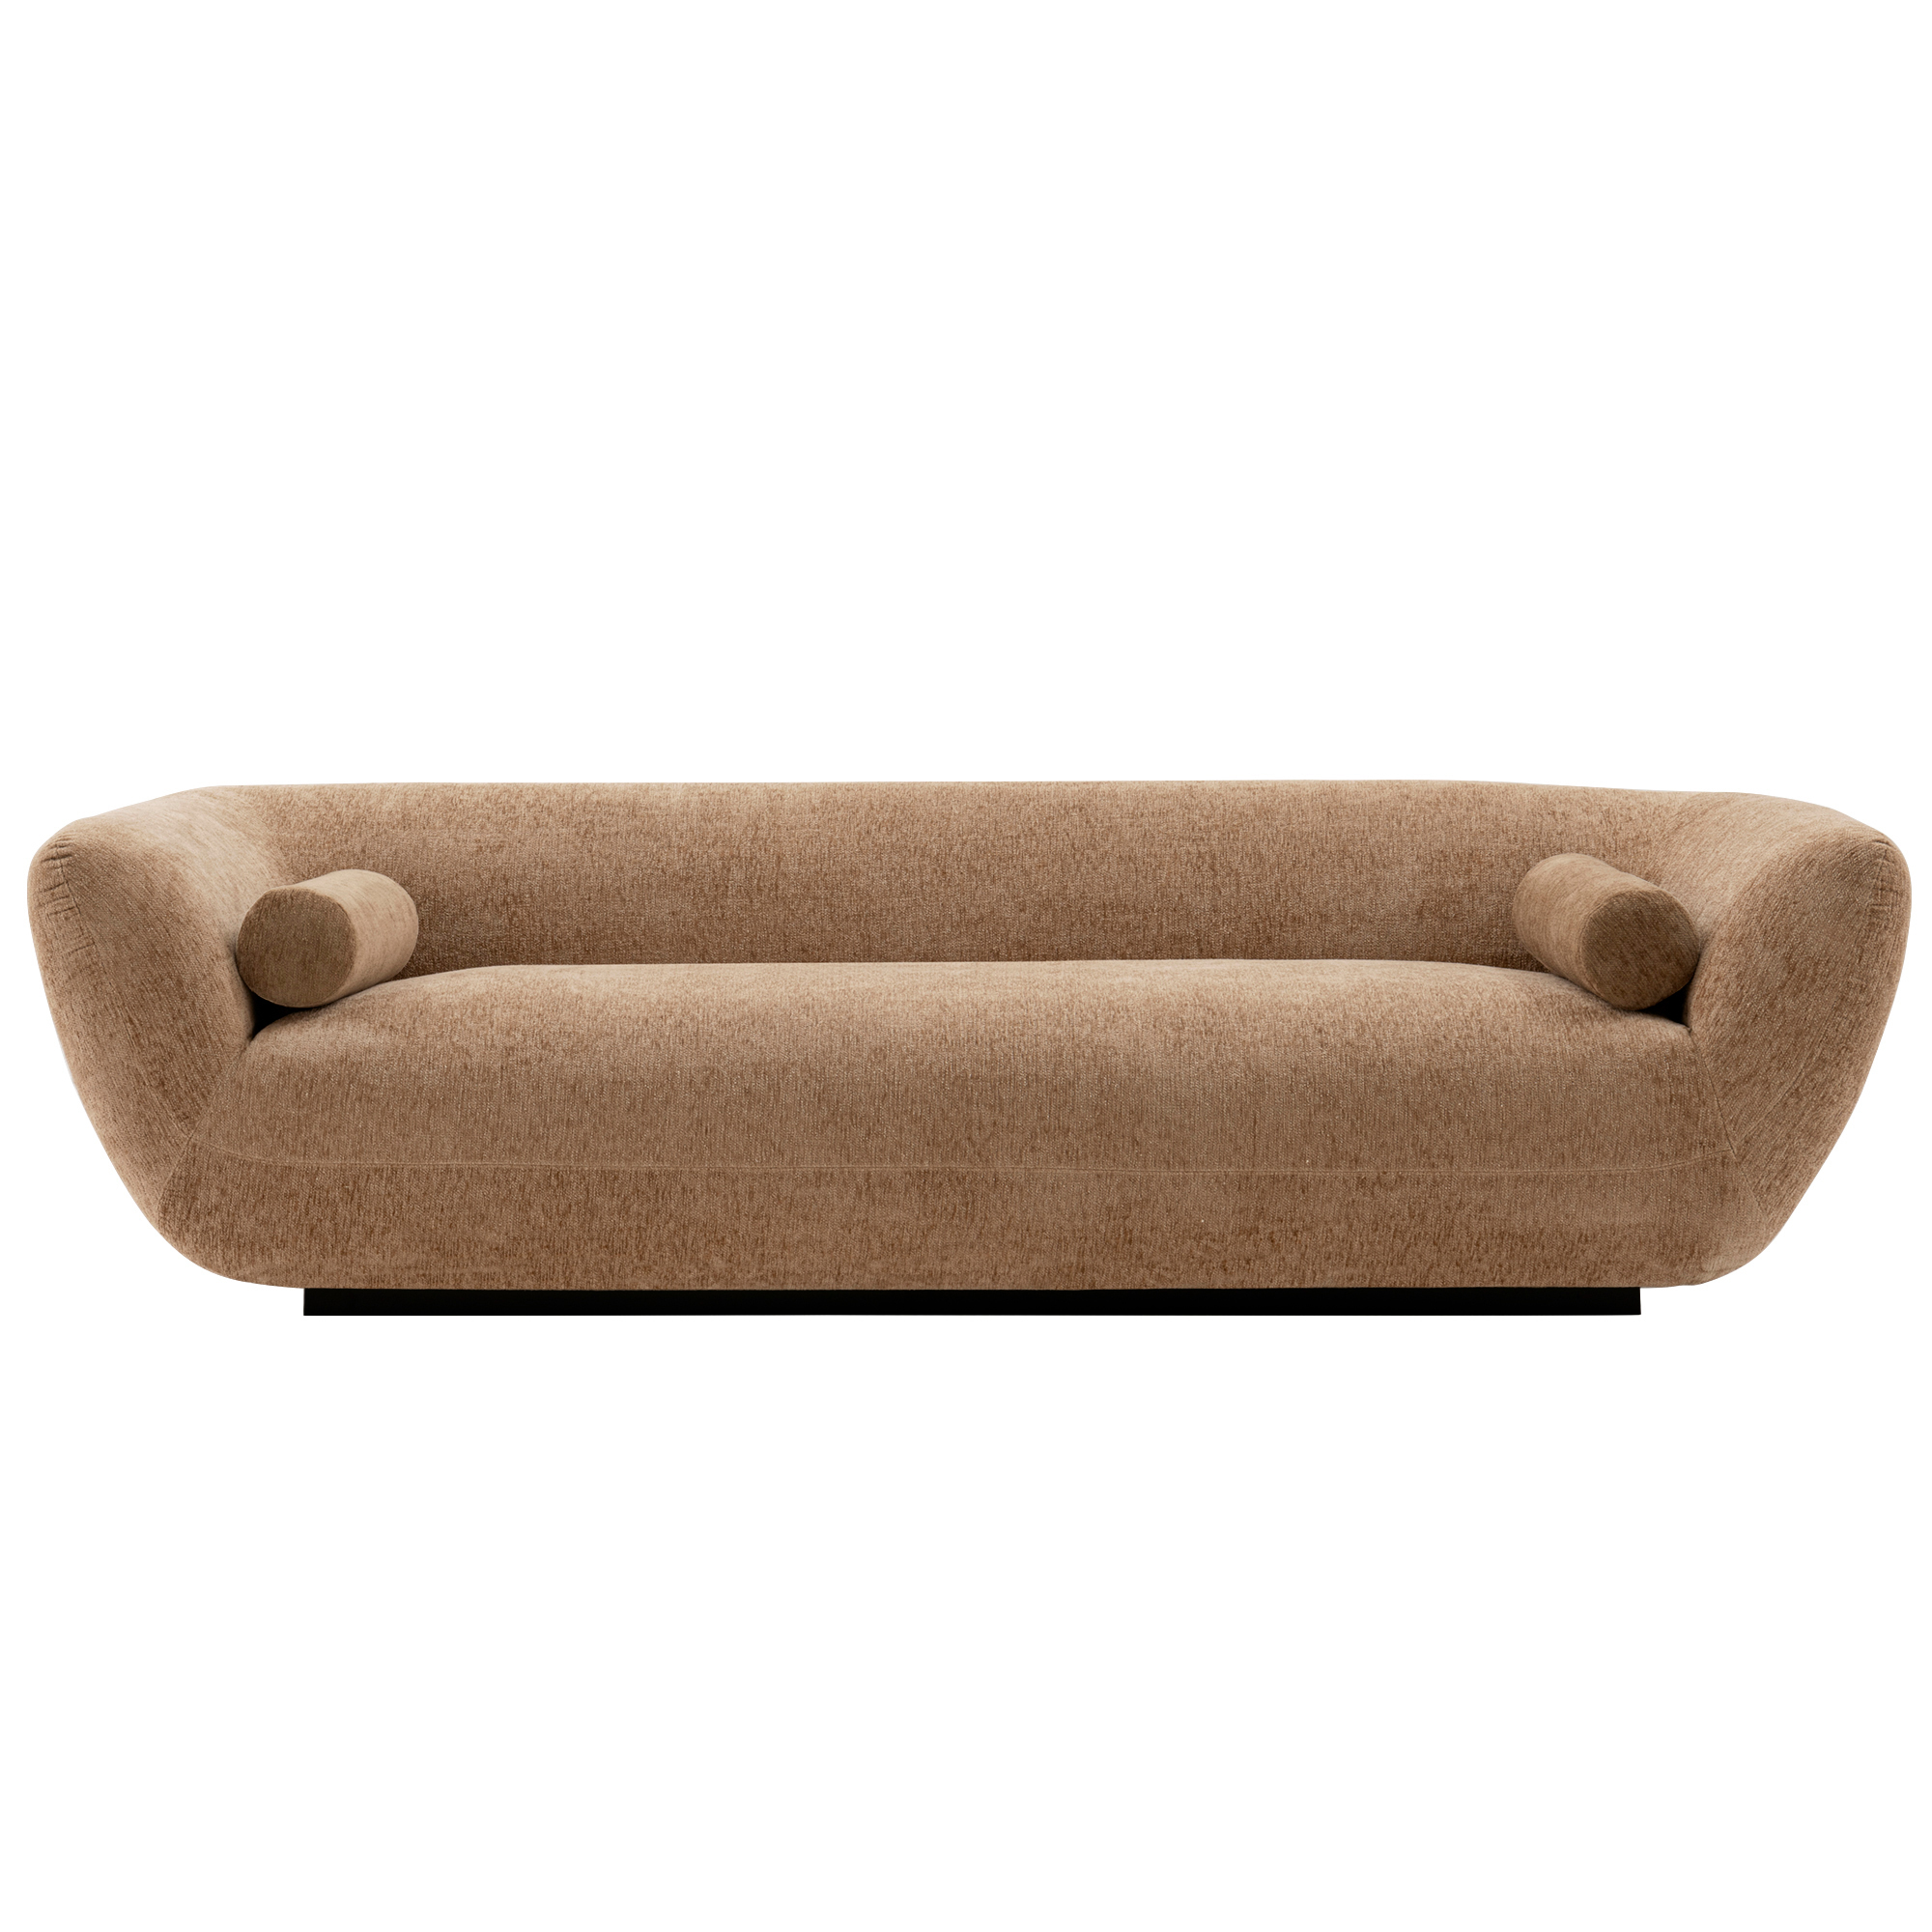 Manhattan Comfort, Contemporary Ulka Boucle Sofa with Pillows Brown, Primary Color Brown, Included (qty.) 1 Model SF011